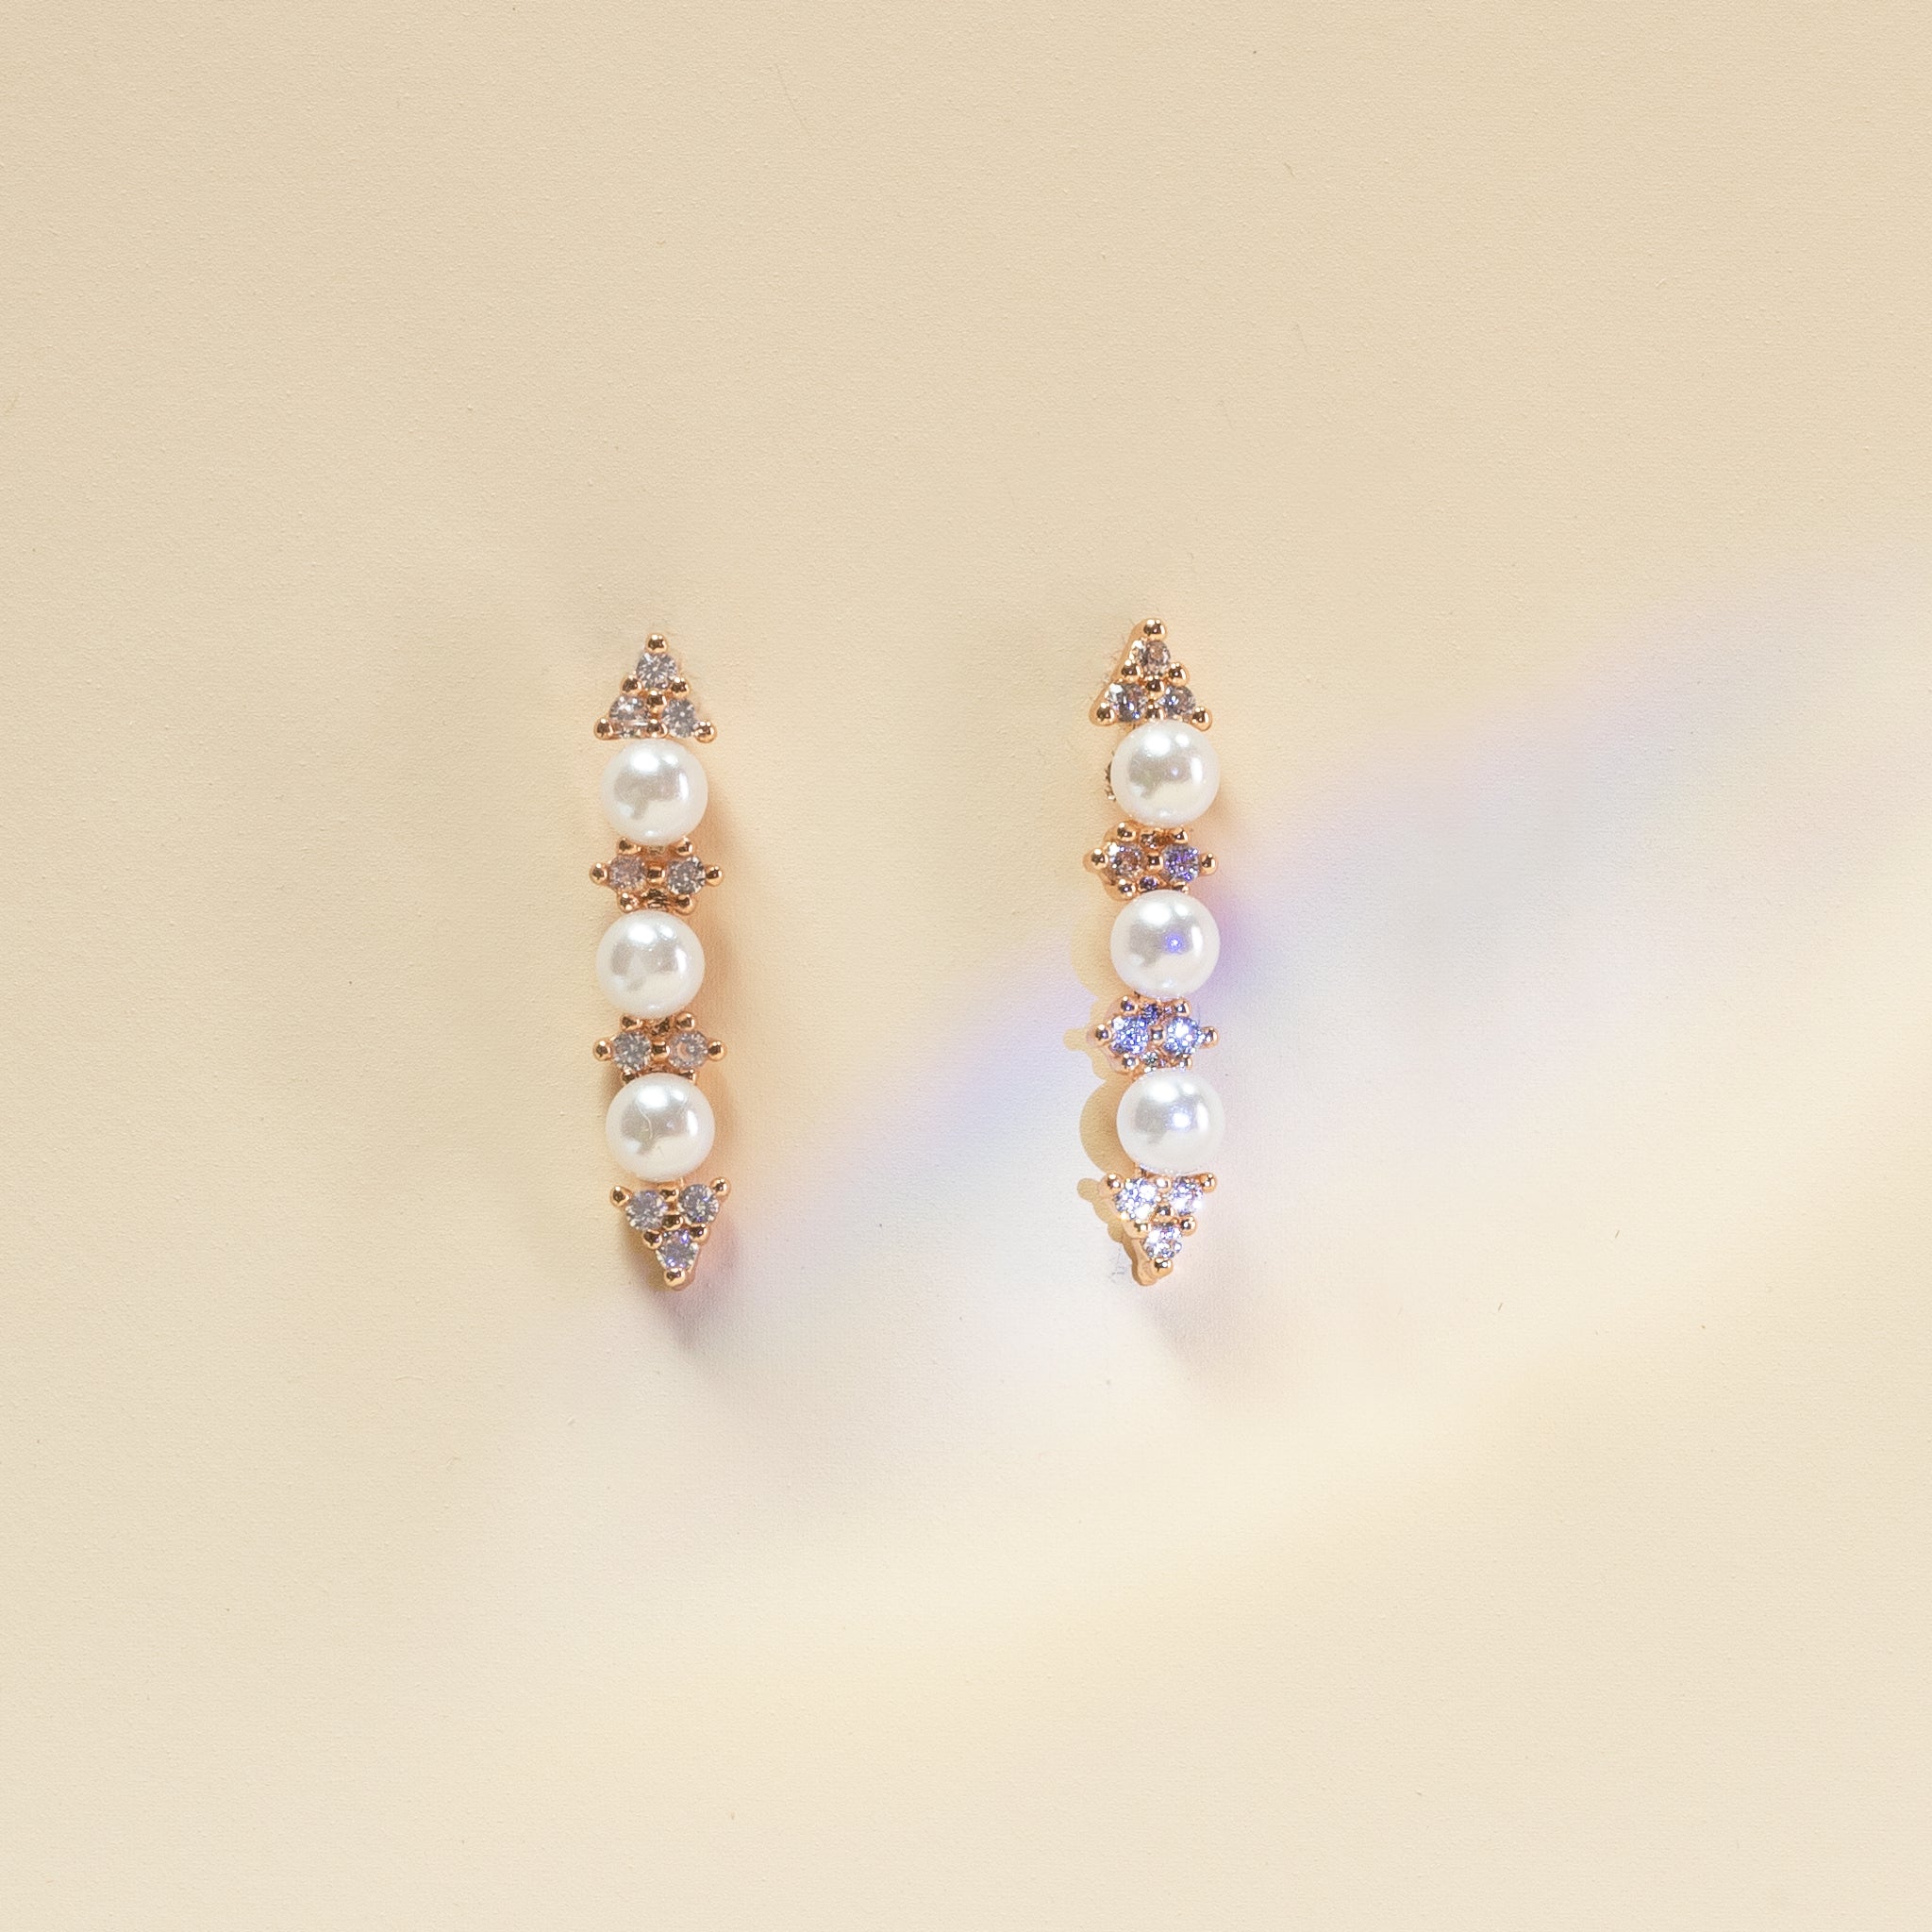 Santa Maria Pearl and Crystal Earrings, front view